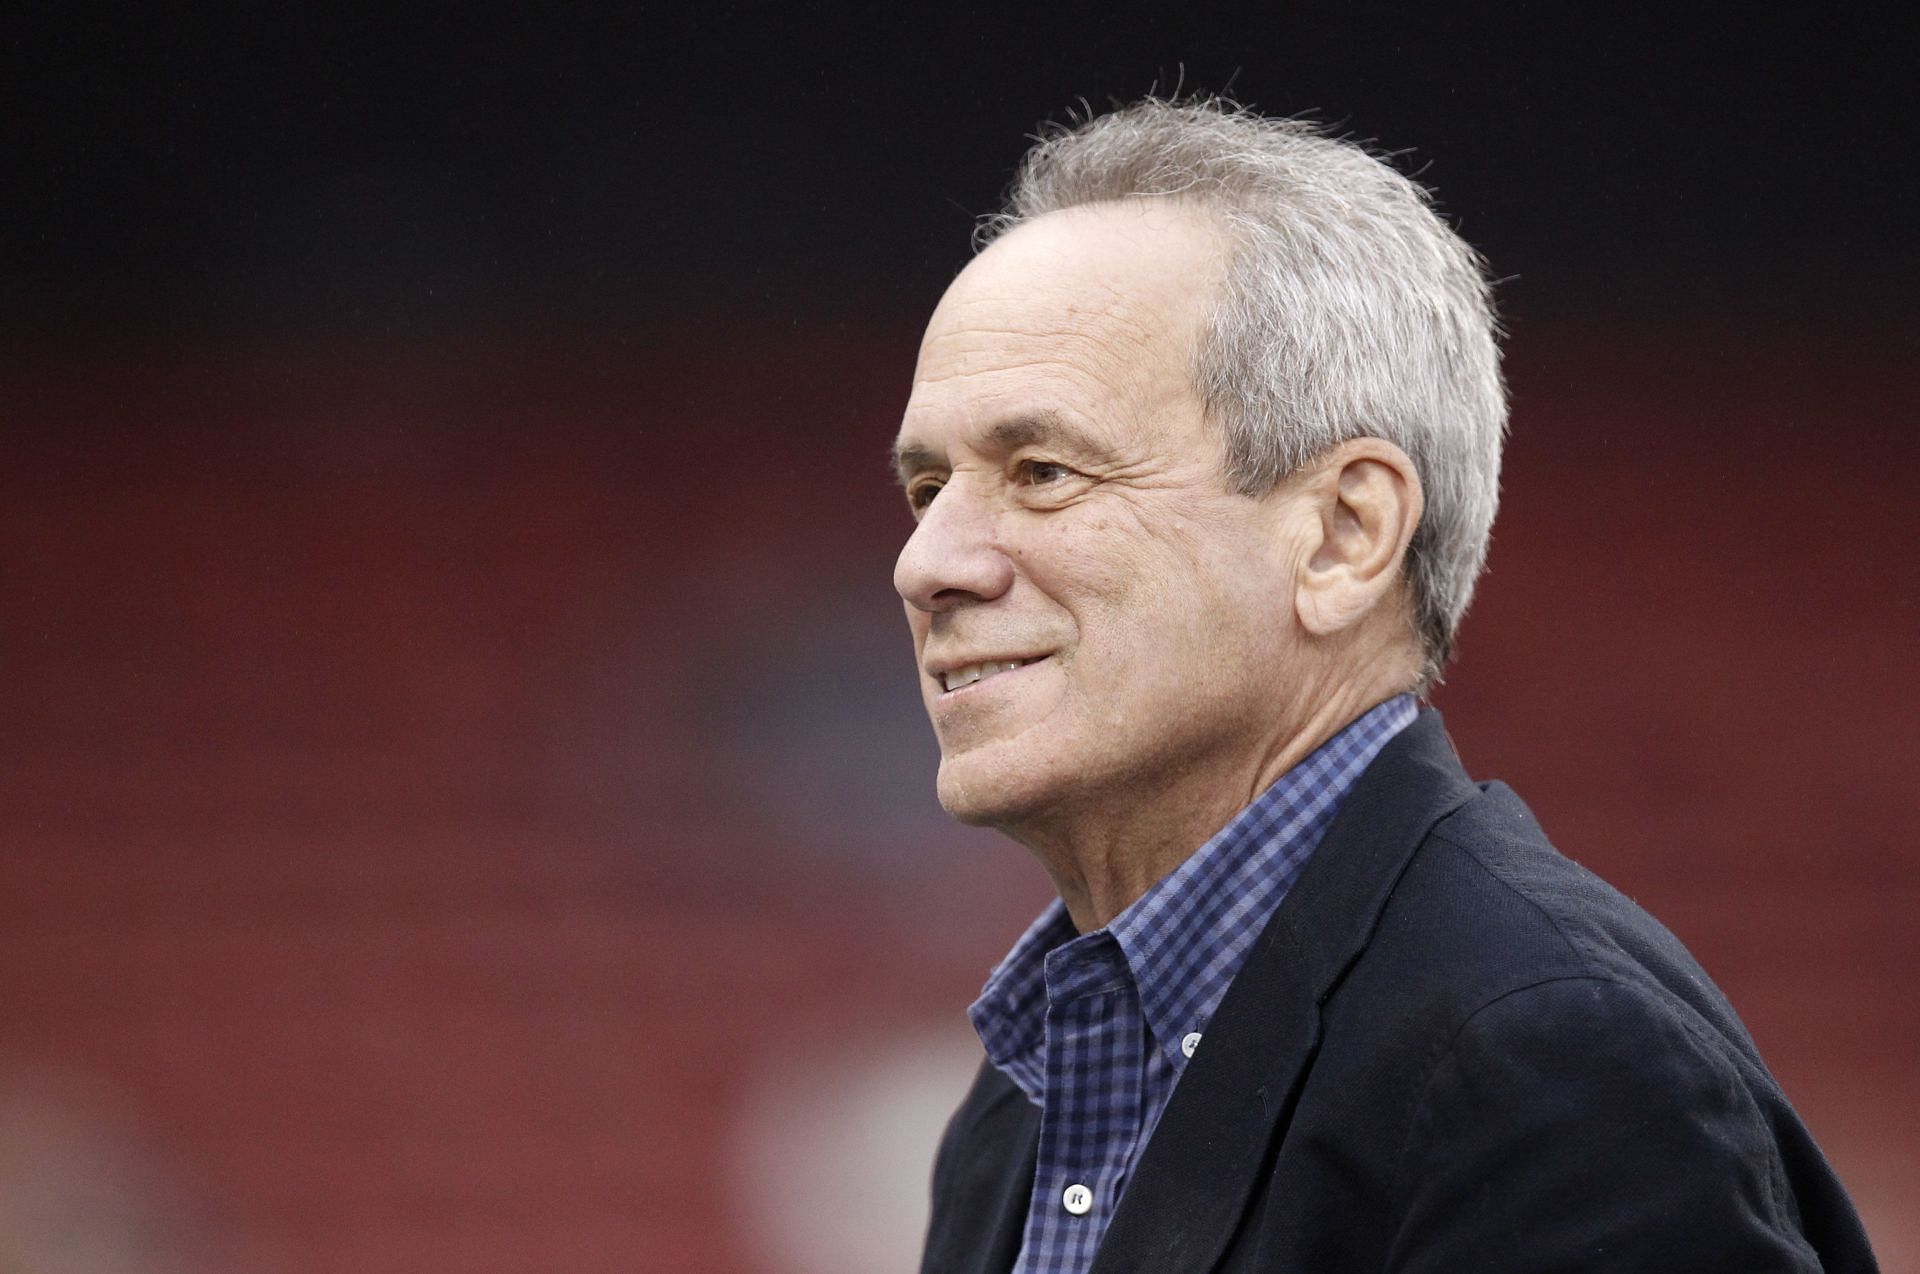 Larry Lucchino broke the Curse of the Bambino